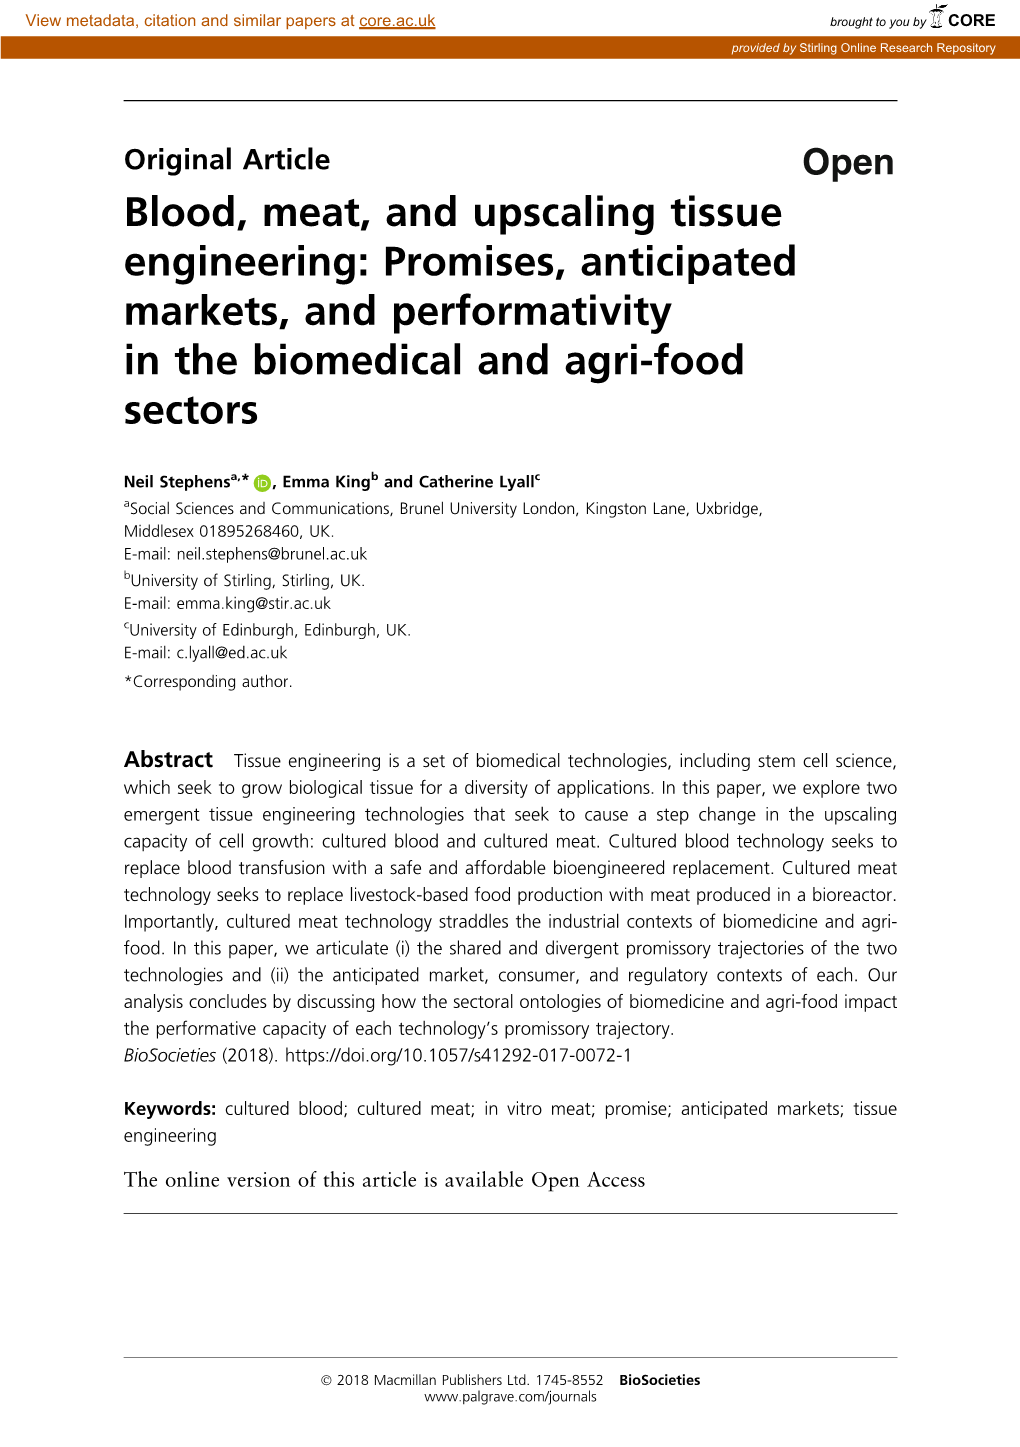 Blood, Meat, and Upscaling Tissue Engineering: Promises, Anticipated Markets, and Performativity in the Biomedical and Agri-Food Sectors